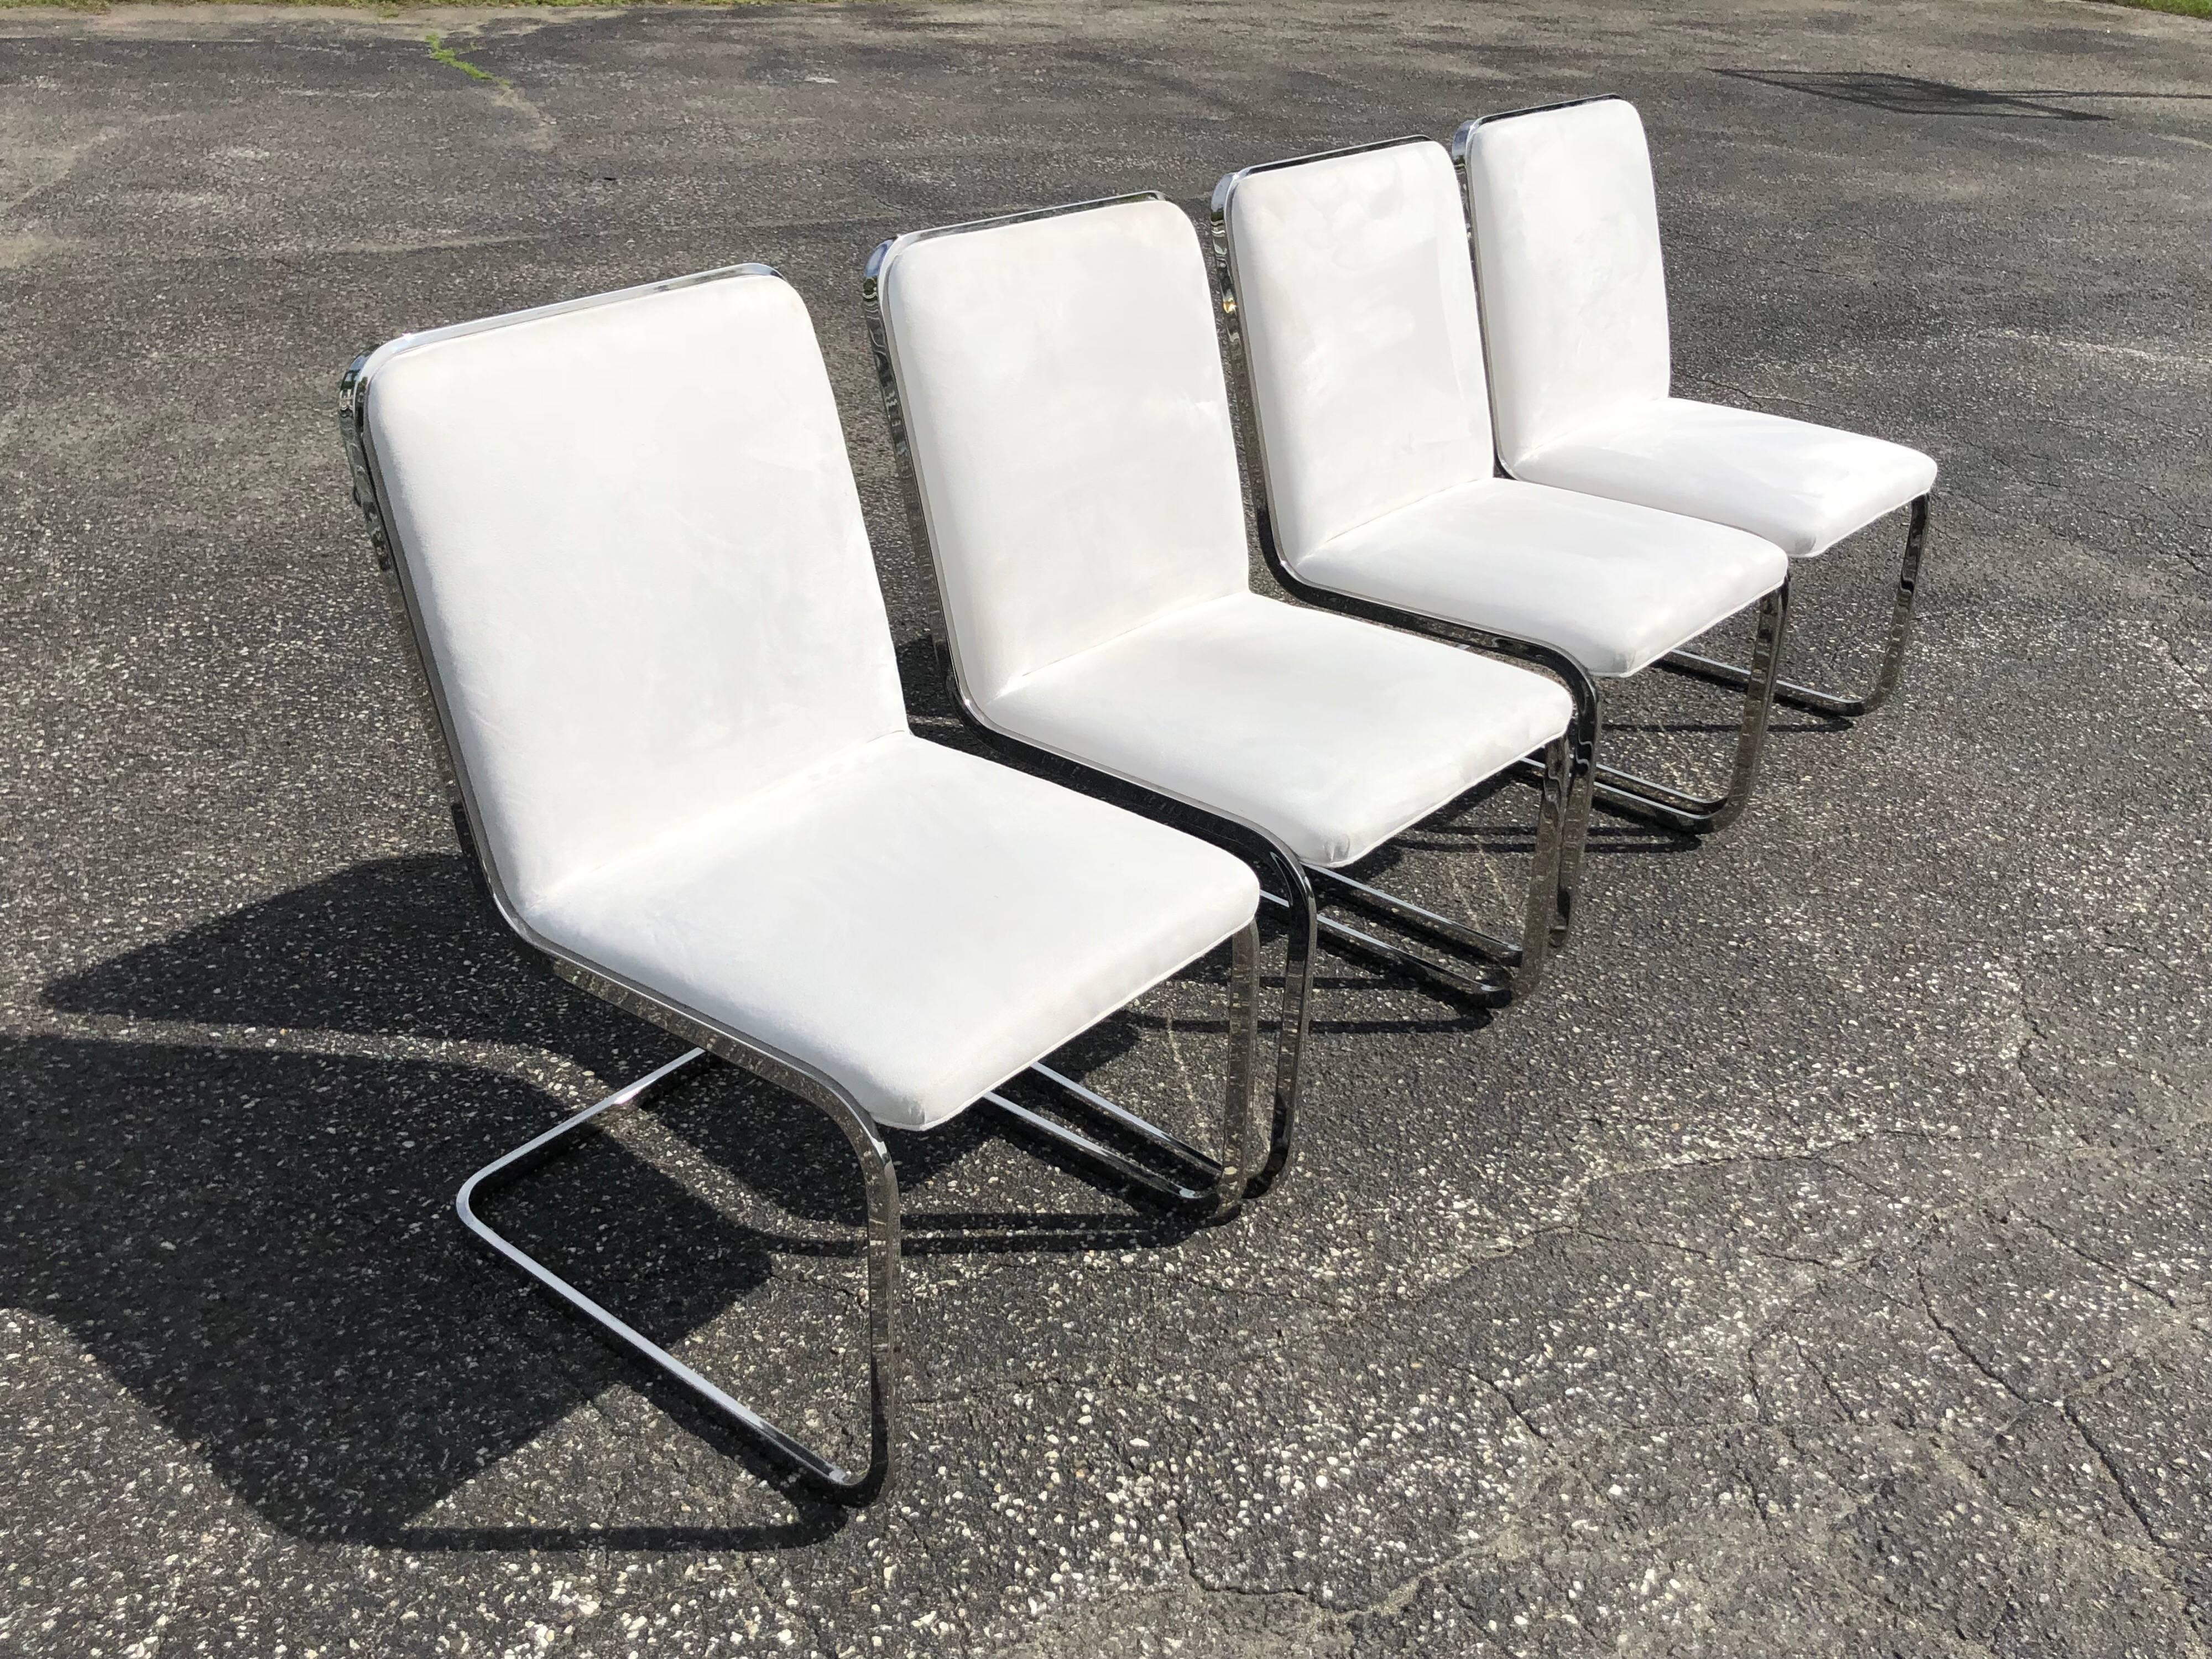 Late 20th Century Hollywood Regency Lucite and Glass Dining Table with Four Chrome Chairs